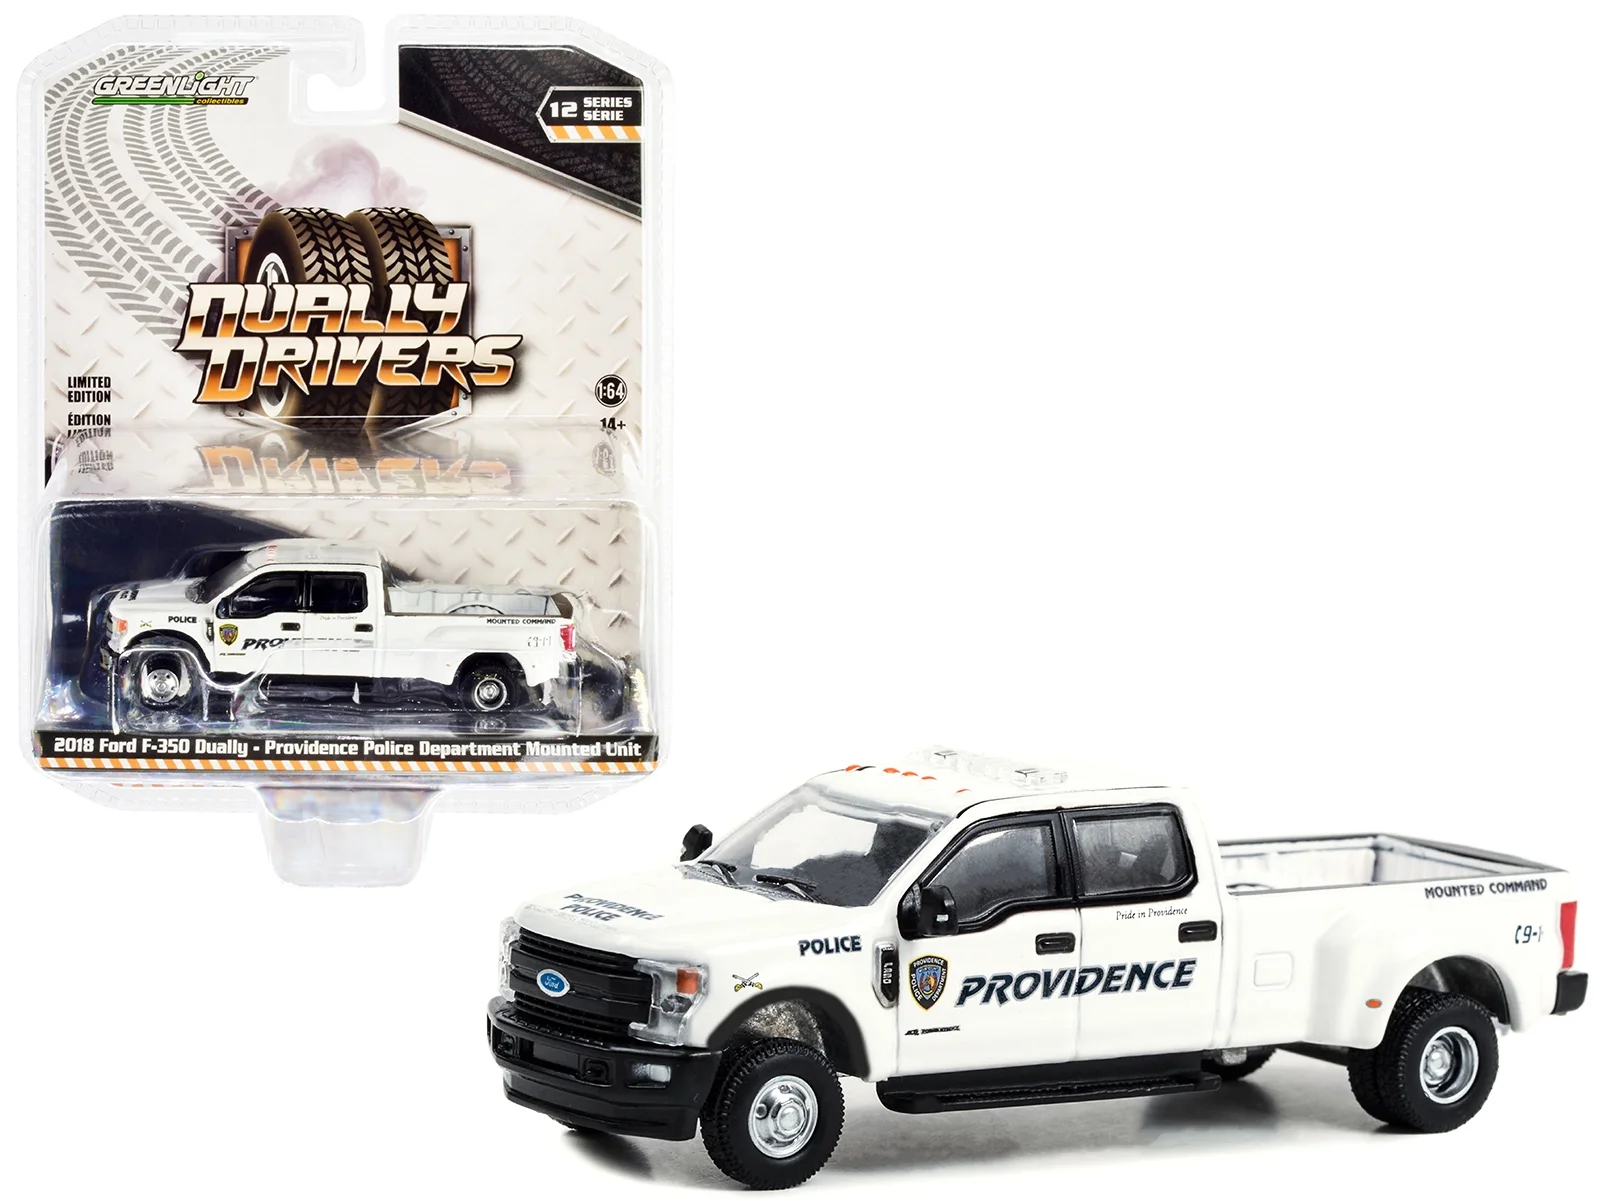 Greenlight 1/64 Dually Drivers Series 12- Providence Police Department Mounted Unit, Mounted Command - Providence, Rhode Island - 2018 Ford F-350 Dually 46120-E - Thumbnail